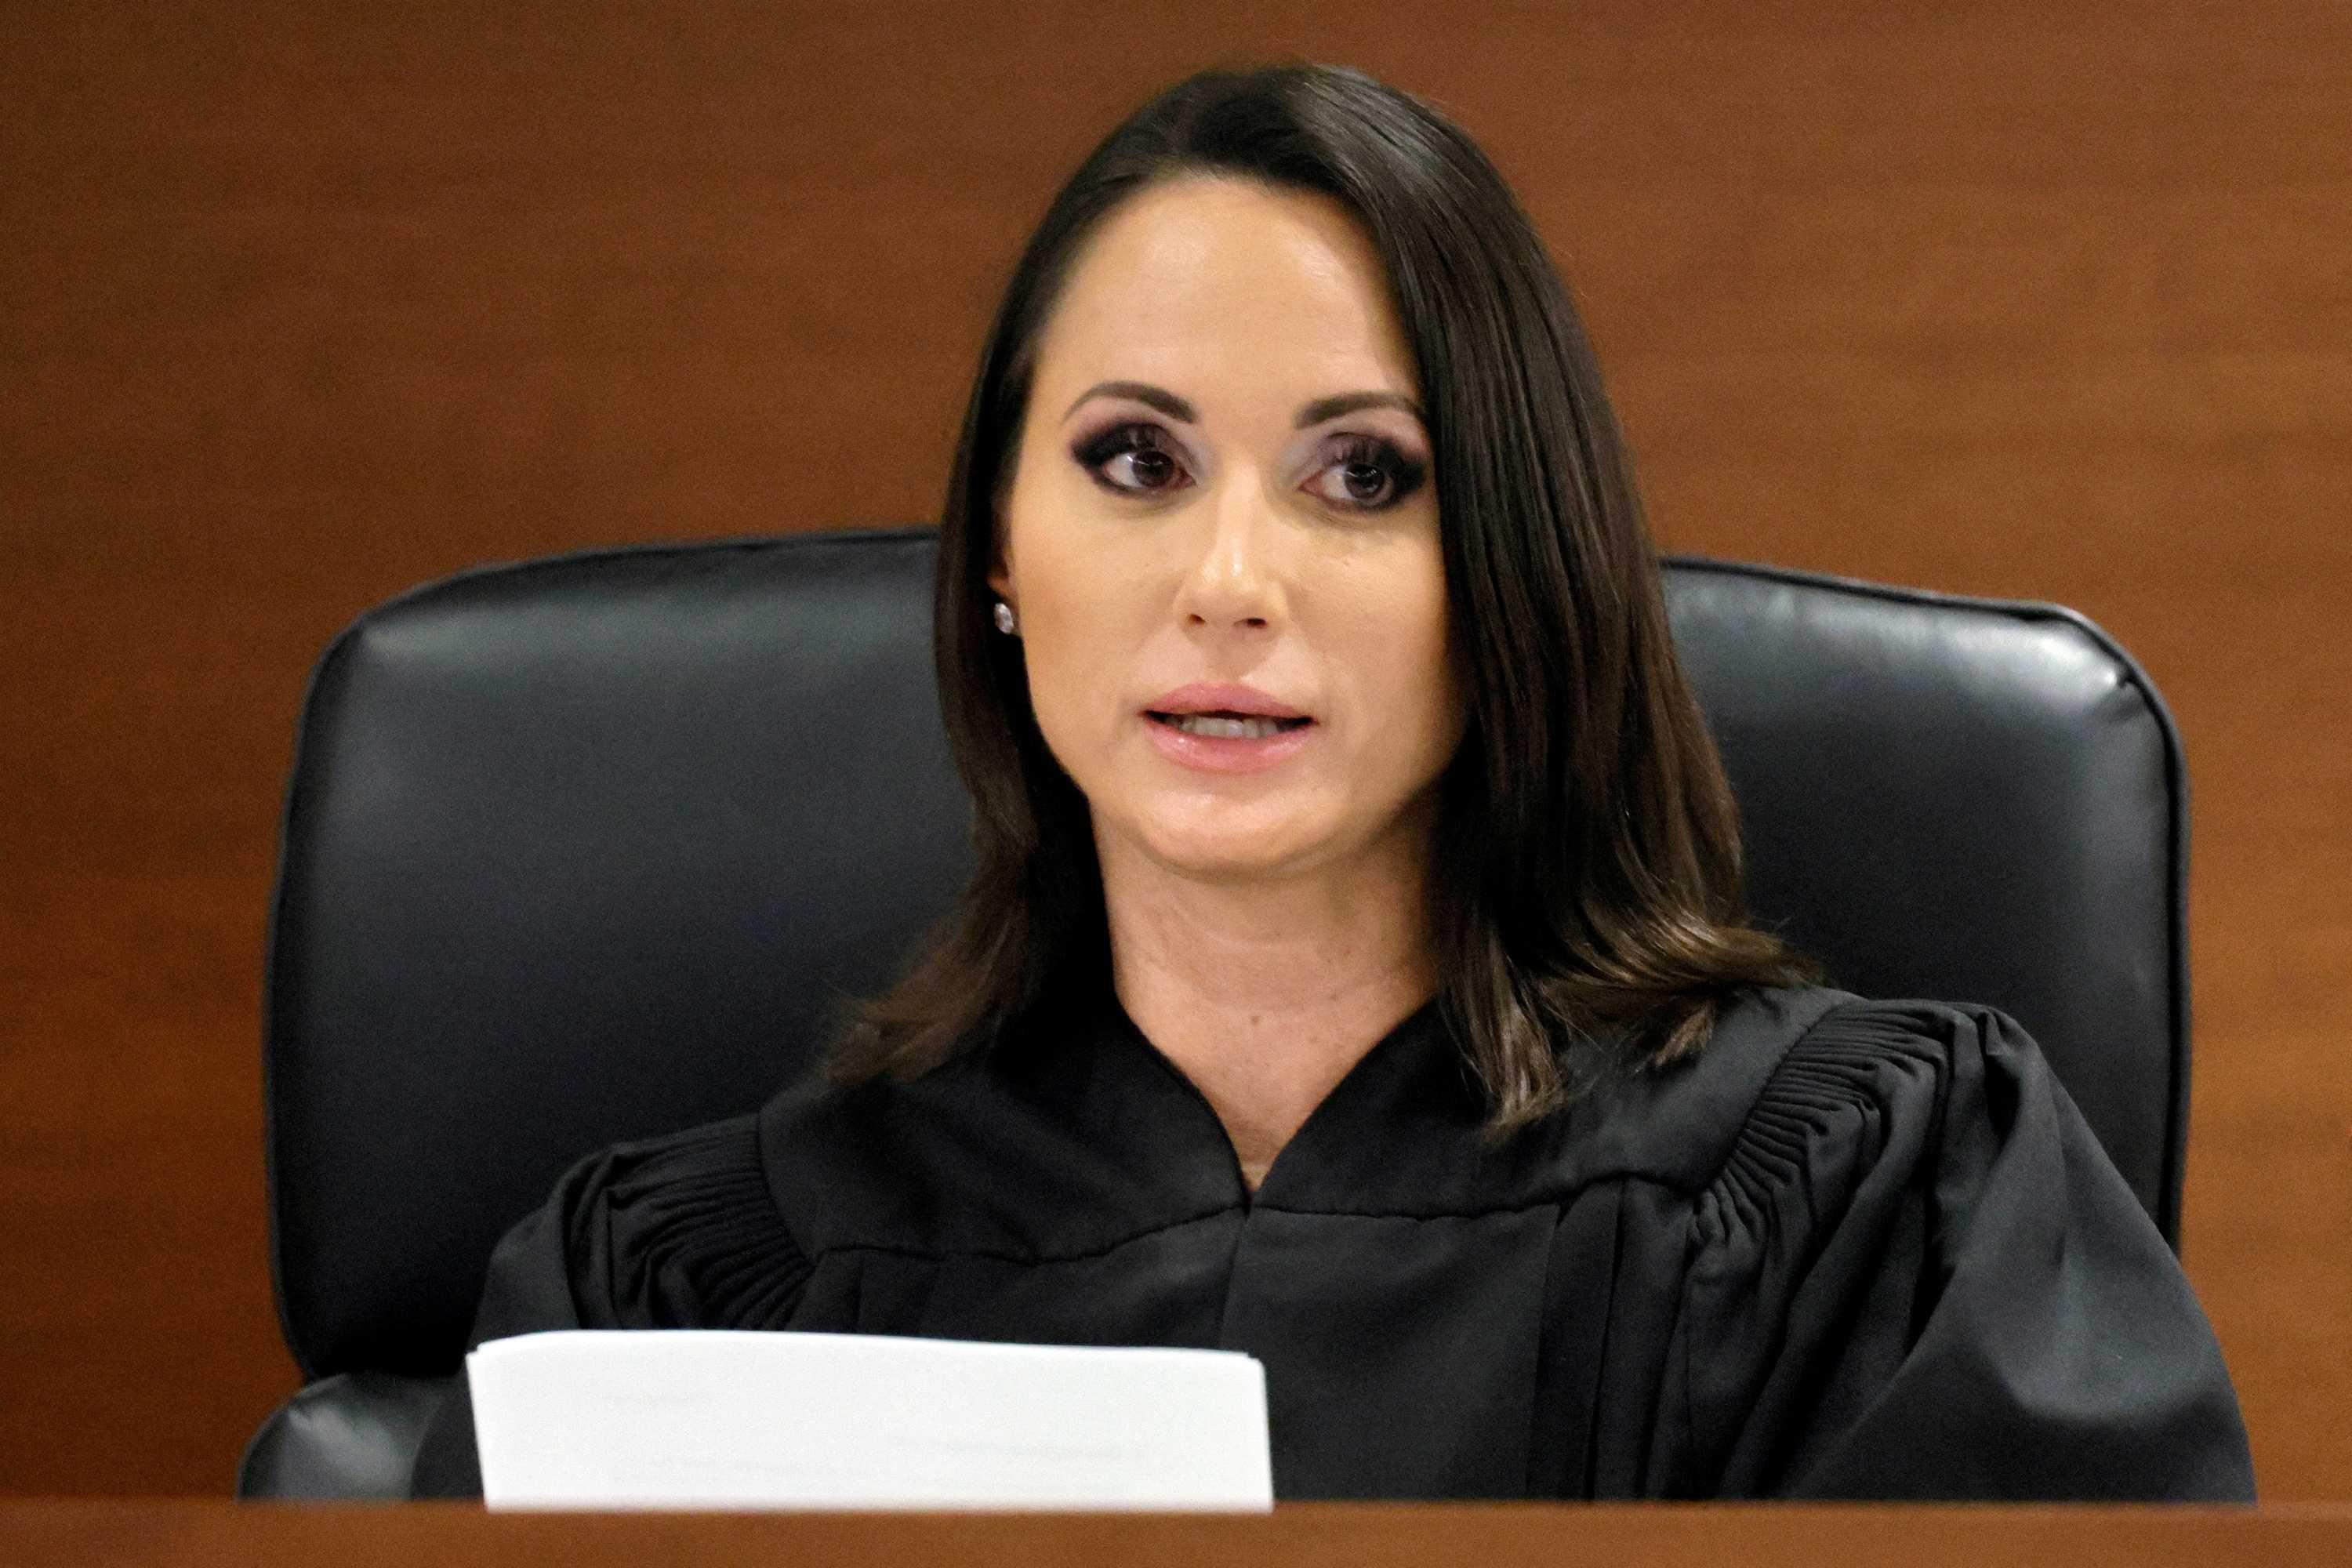 Judge Elizabeth Scherer reads the verdict in the trial of Marjory Stoneman Douglas High School shooter Nikolas Cruz at the Broward County Courthouse in Fort Lauderdale, Florida, US, Oct 13, 2022. Photo: Reuters